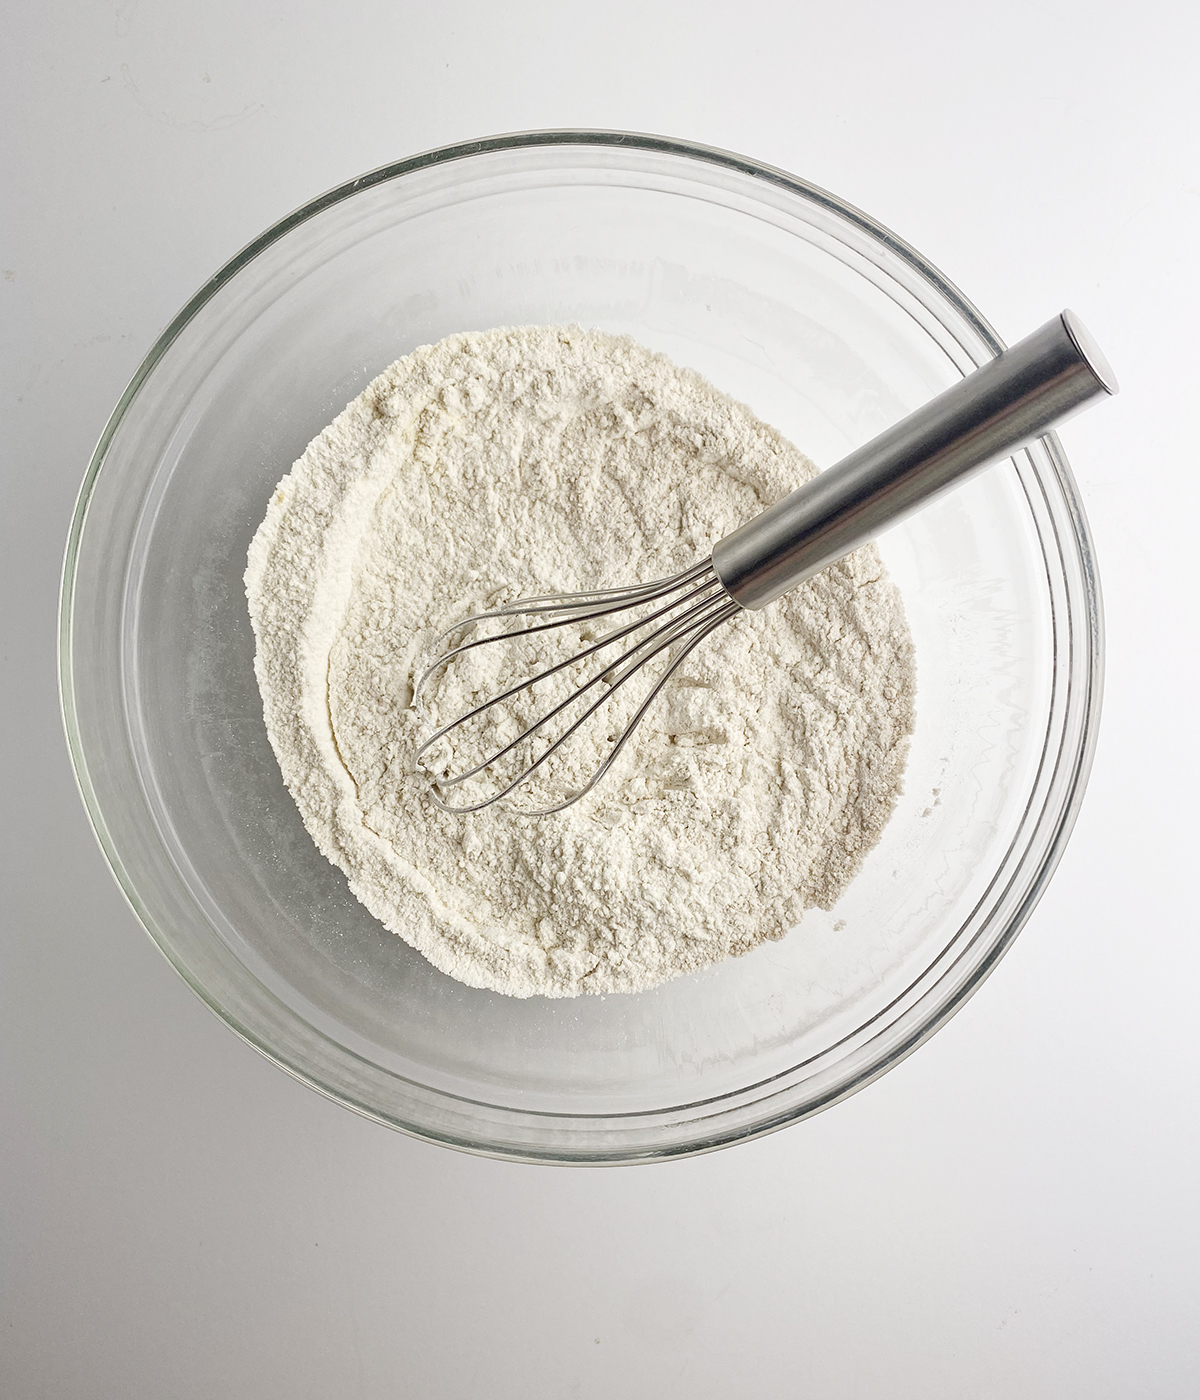 Flour mixture in a mixing bowl with a whisk.